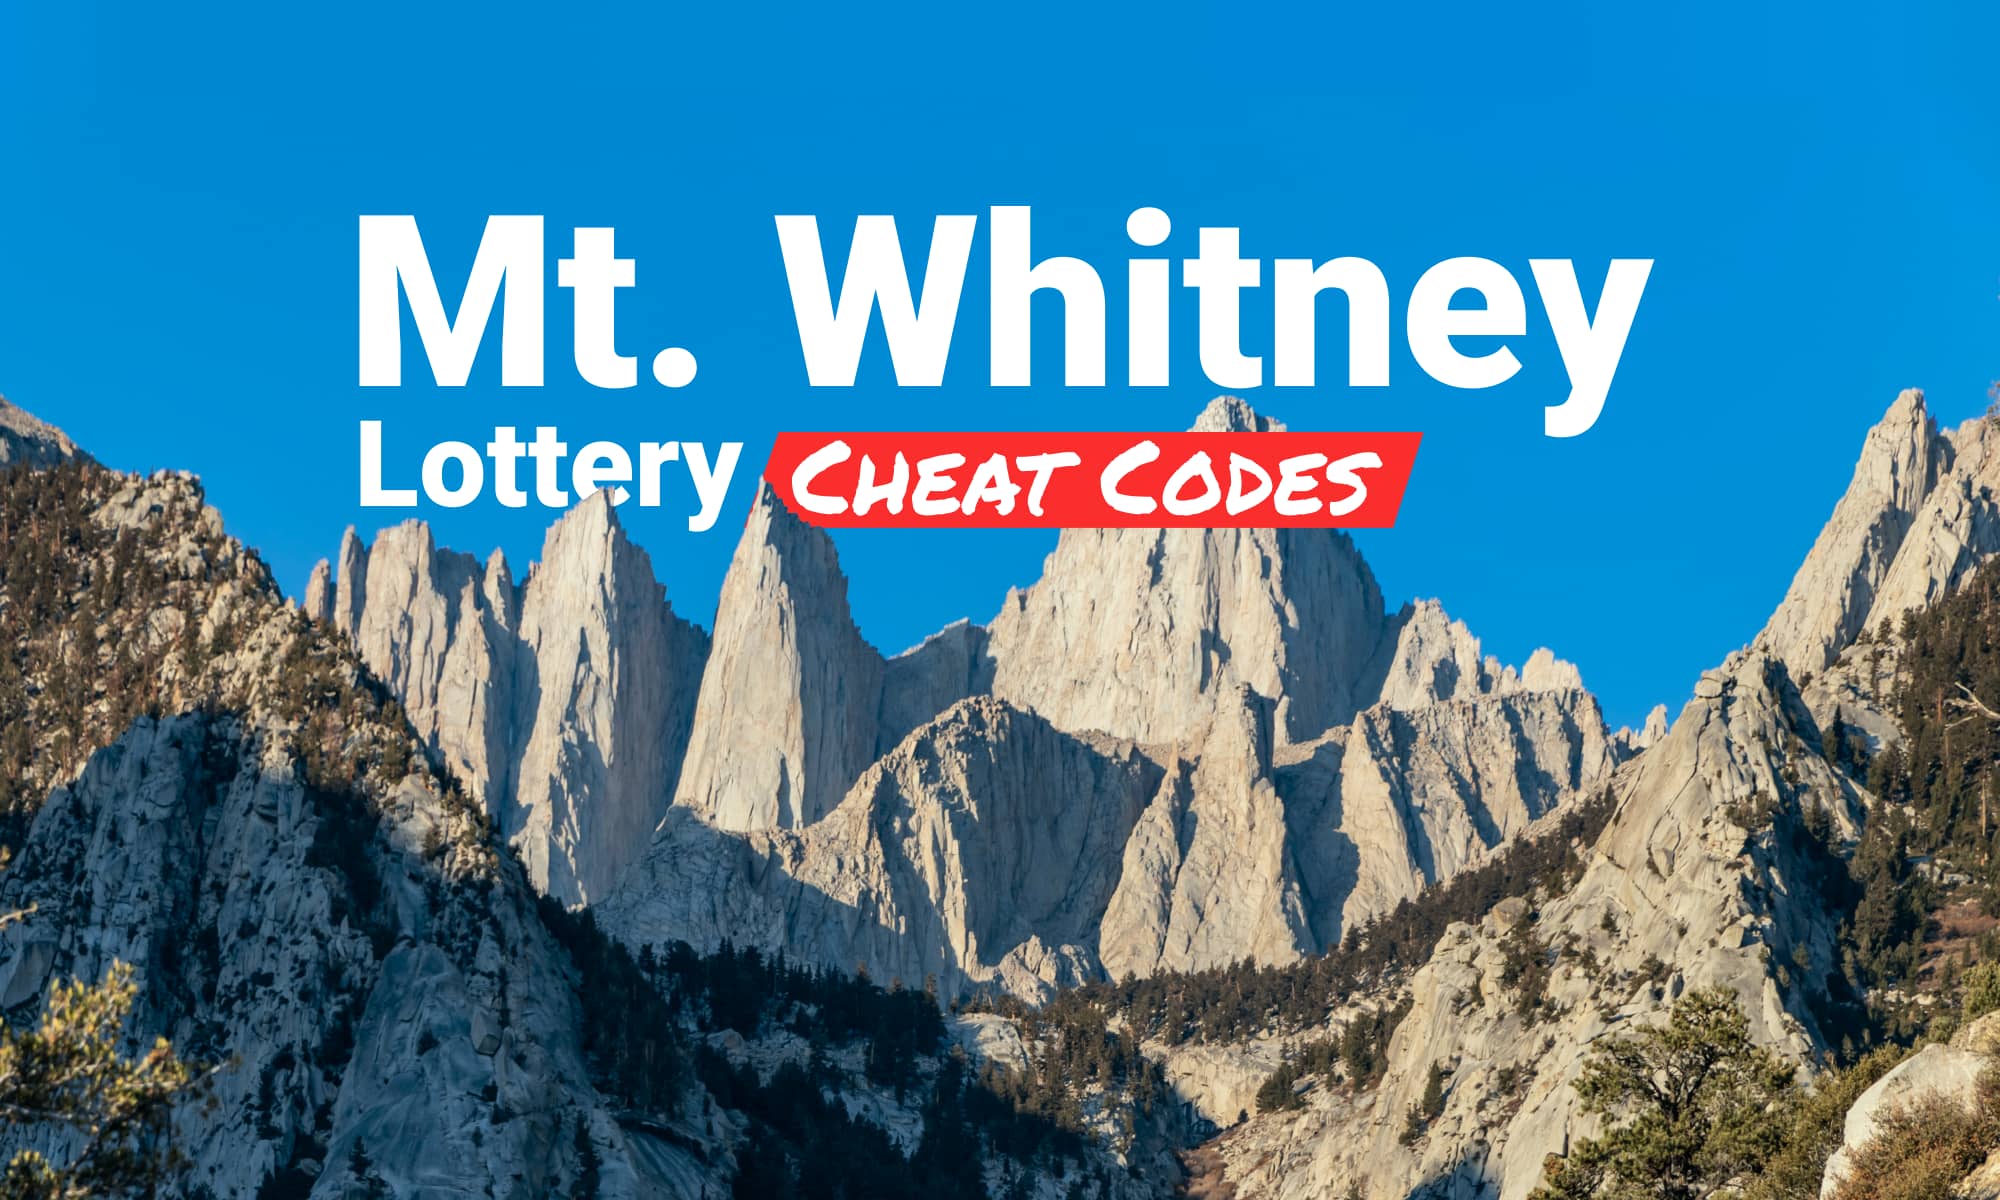 Mt. Whitney Lottery Cheat Codes